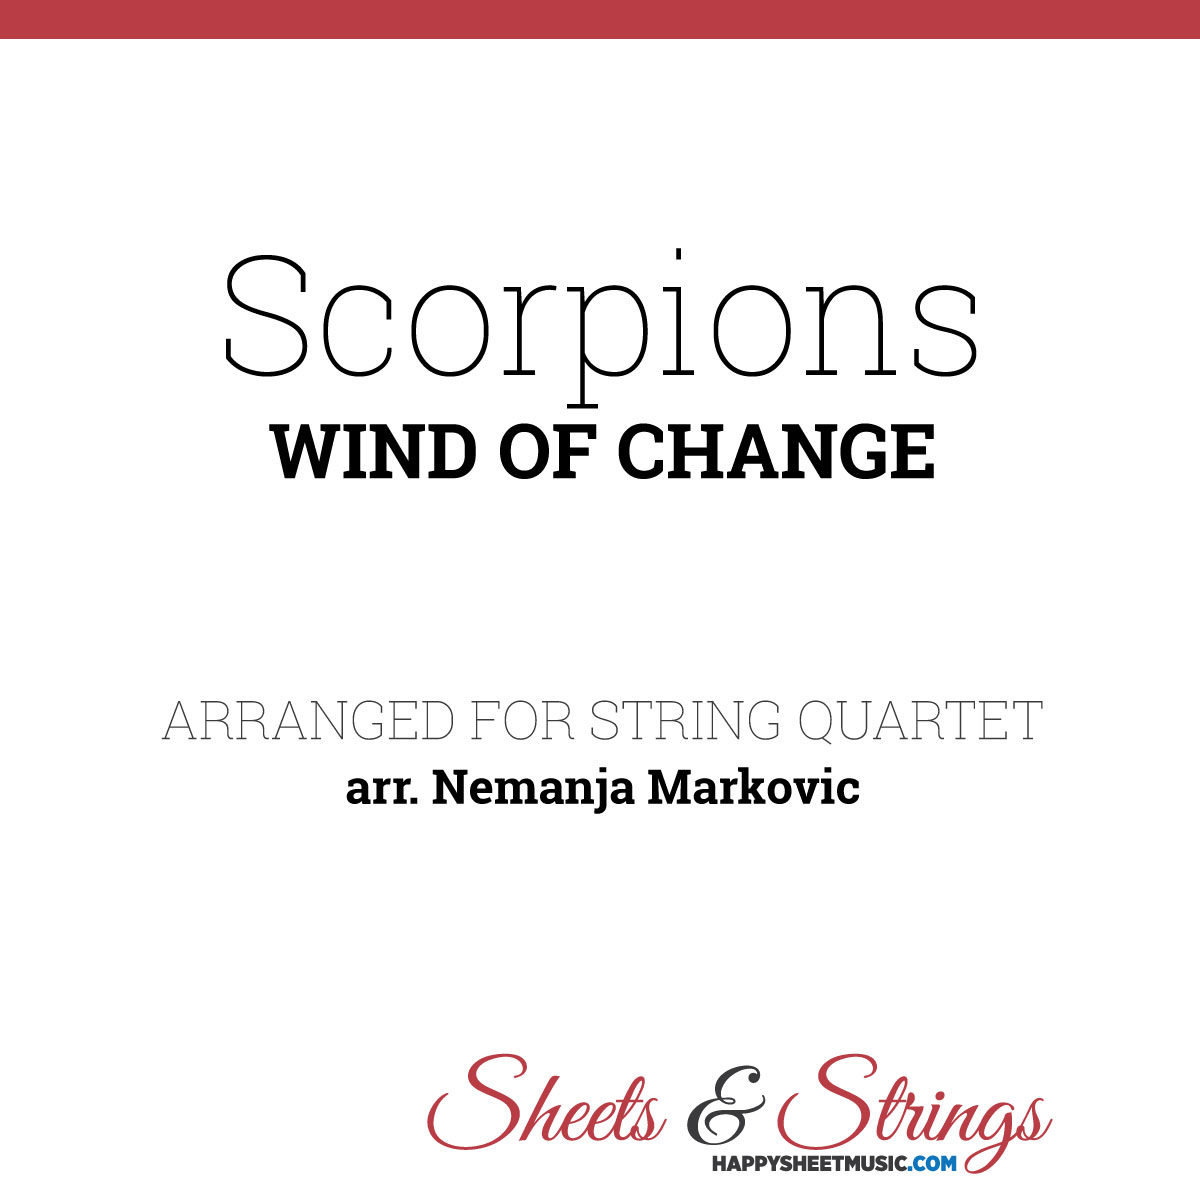 Scorpions - Wind of Change - Sheet Music for String Quartet - Music Arrangement for String Quartet